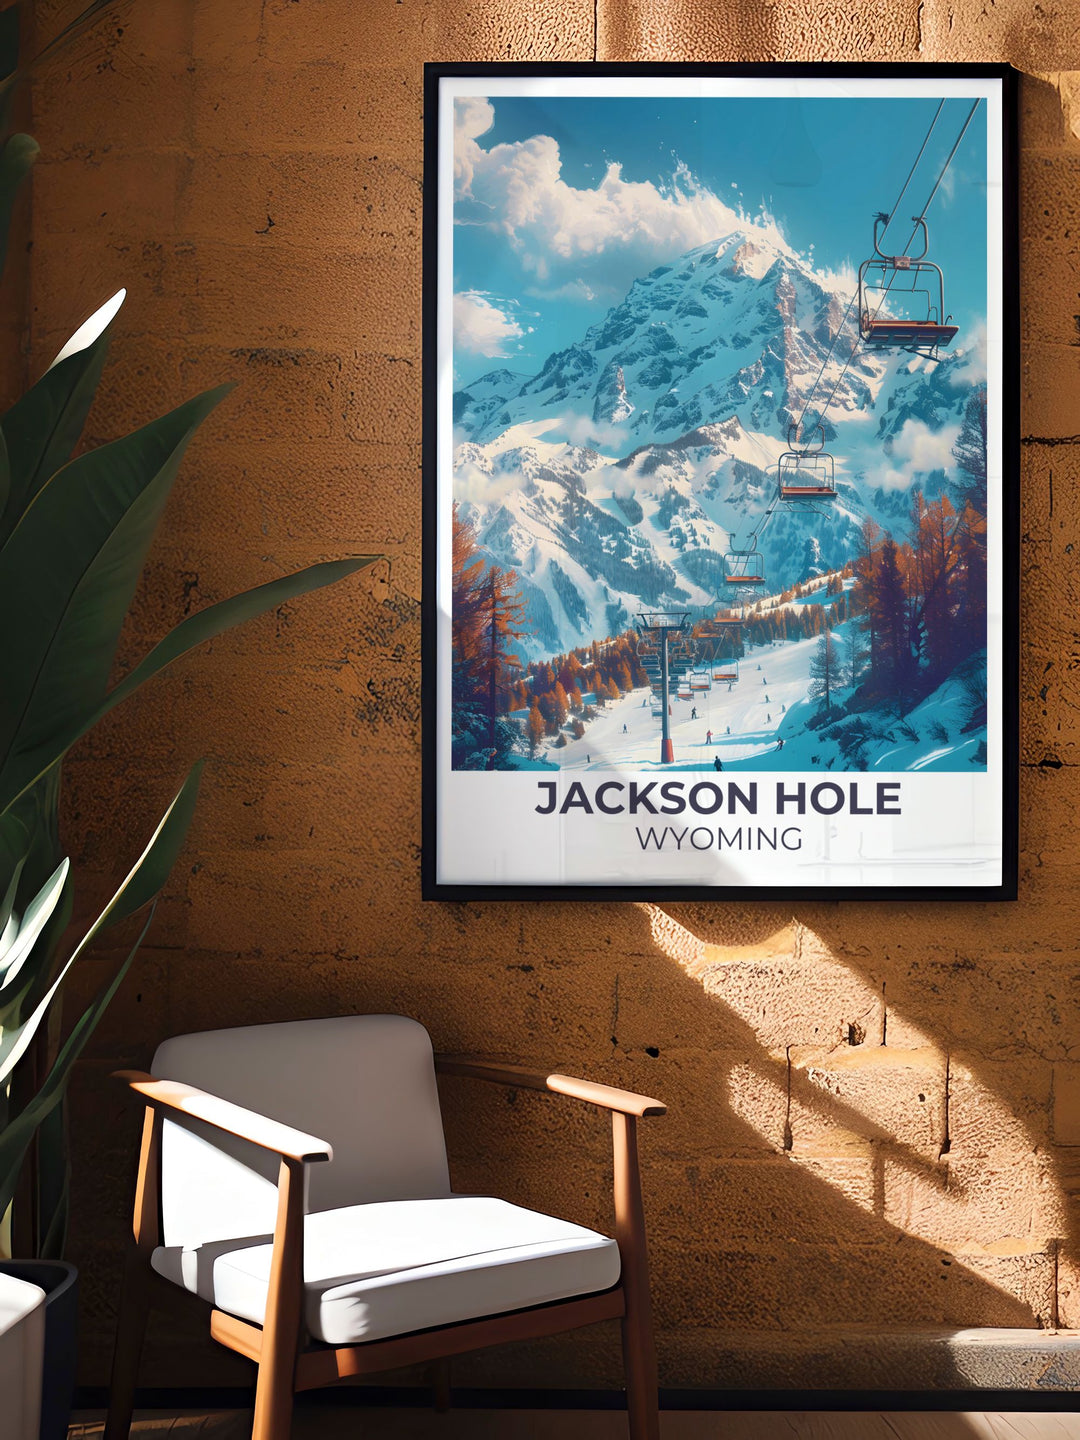 Vintage style art print of Jackson Hole ski resort capturing the thrill of downhill skiing in a rustic design